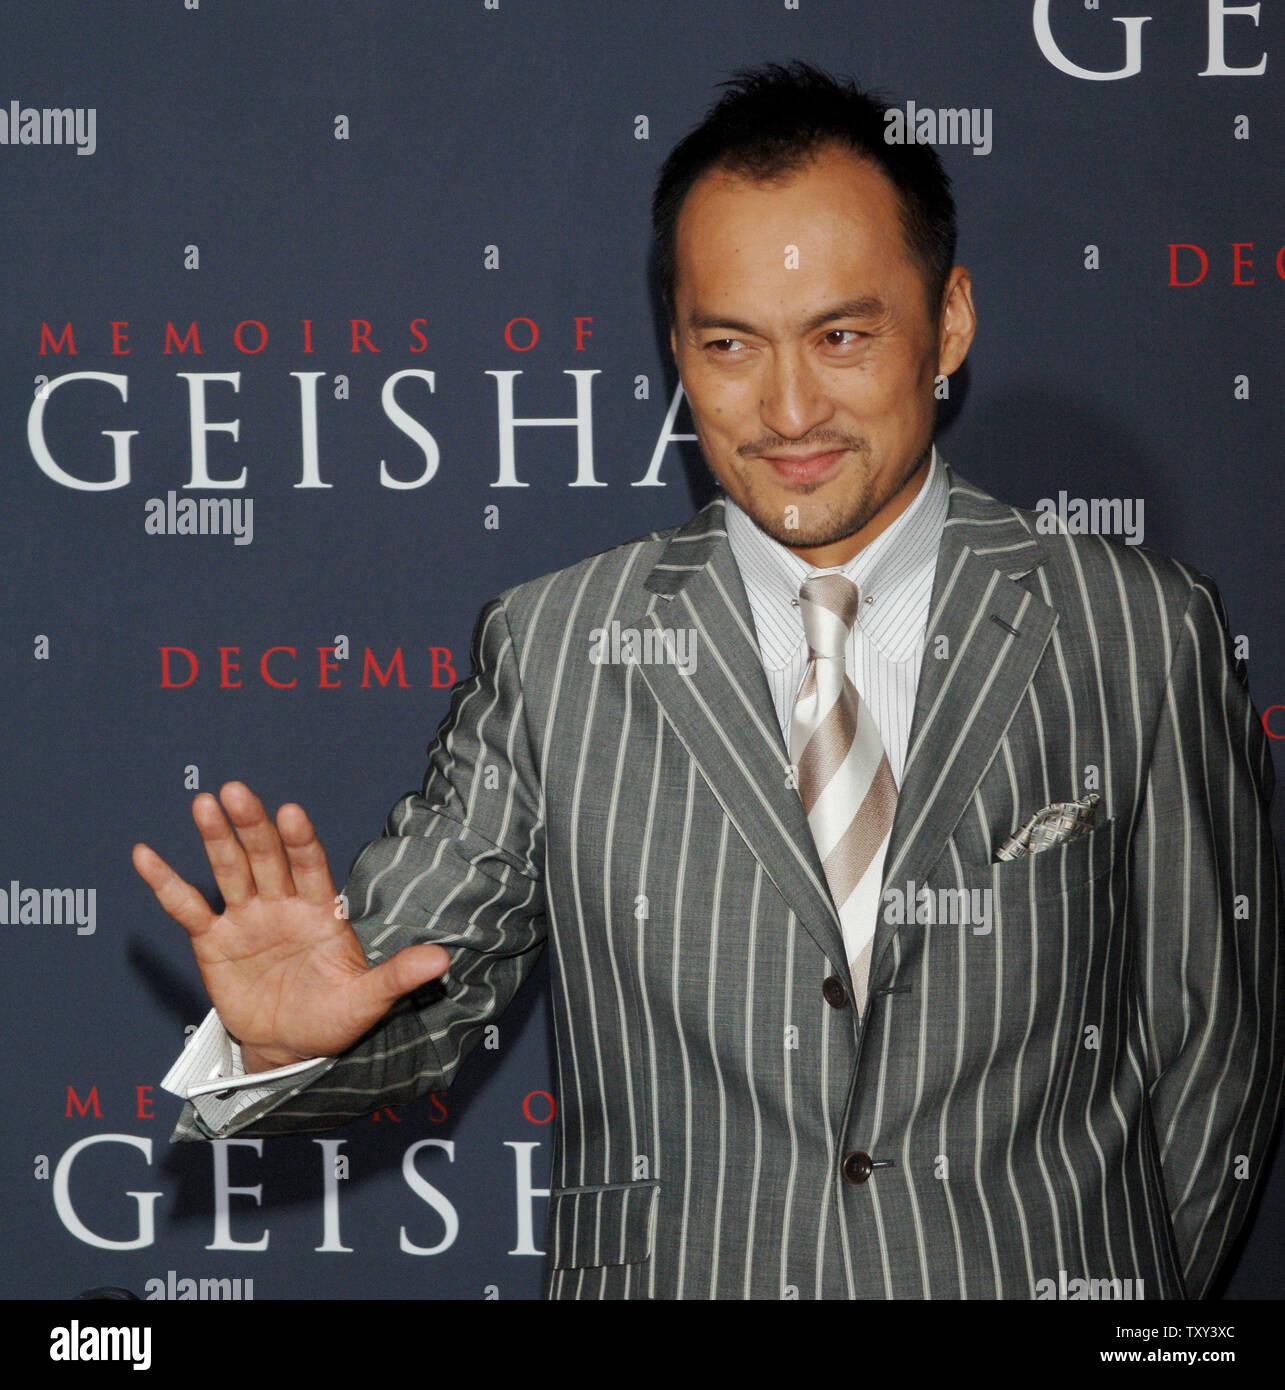 Japanese actor Ken Watanabe, a cast member in the romantic drama motion picture 'Memoirs of a Geisha' arrives for the premiere of the film at the Kodak Theatre in the Hollywood section of Los Angeles, California December 4, 2005. The movie is based on the novel by Arthur Golden and tells the story of a Japanese child (Zhang) who goes from working as a maid in a geisha house to becoming the legendary geisha Sayuri. The movie opens in the U.S. December 9. (UPI Photo/Jim Ruymen) Stock Photo